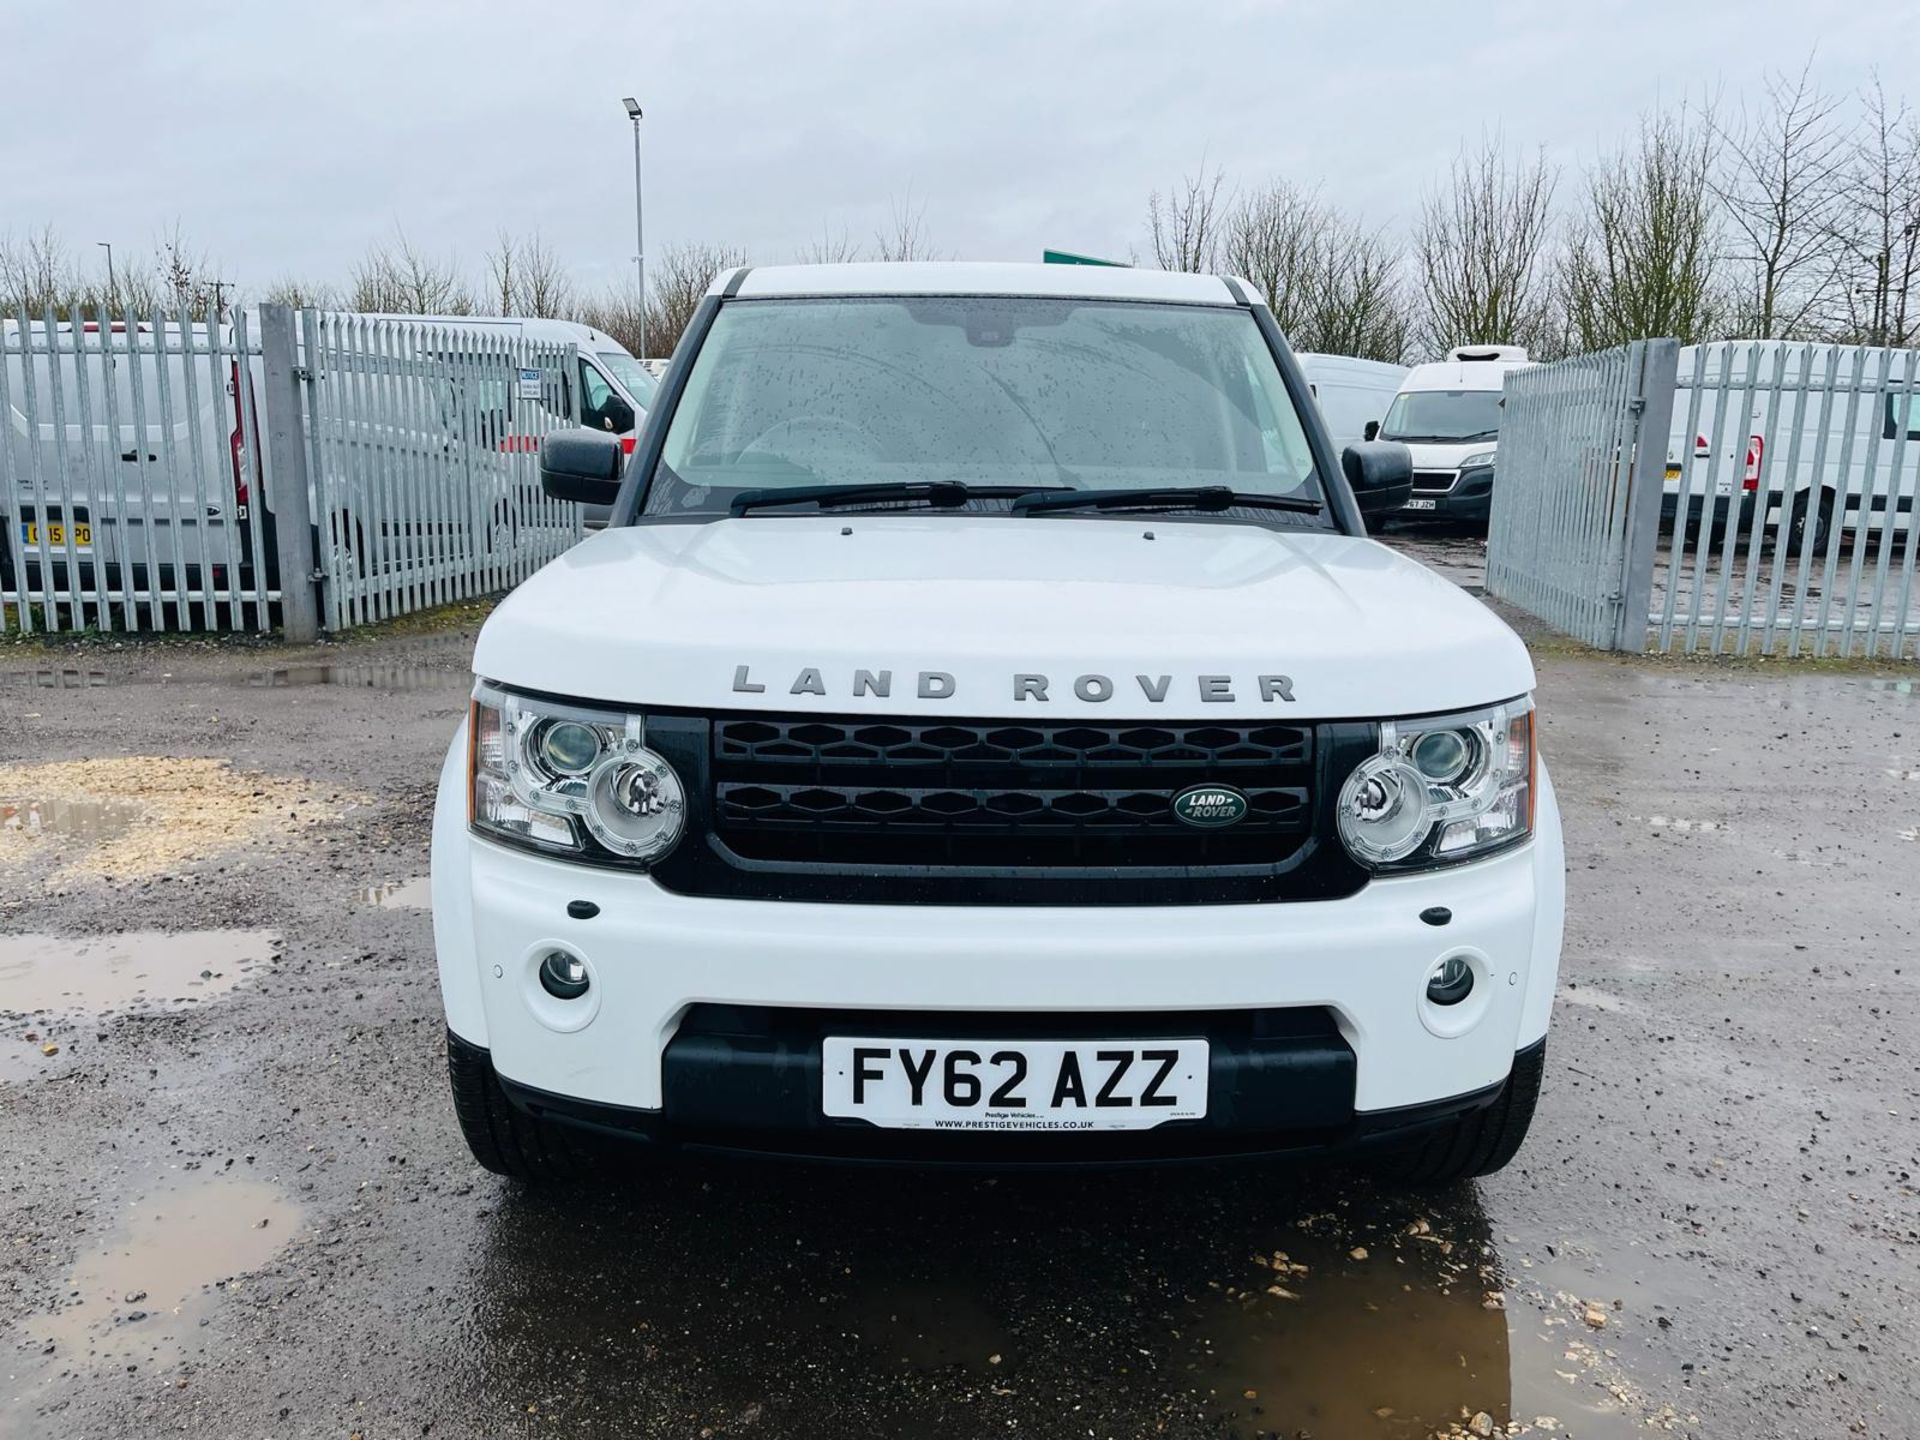 ** ON SALE ** Land Rover Discovery 4 255 SDV6 3.0 2012 '62 Reg' - Alloy Wheels - A/C - Tow Bar - Image 2 of 32